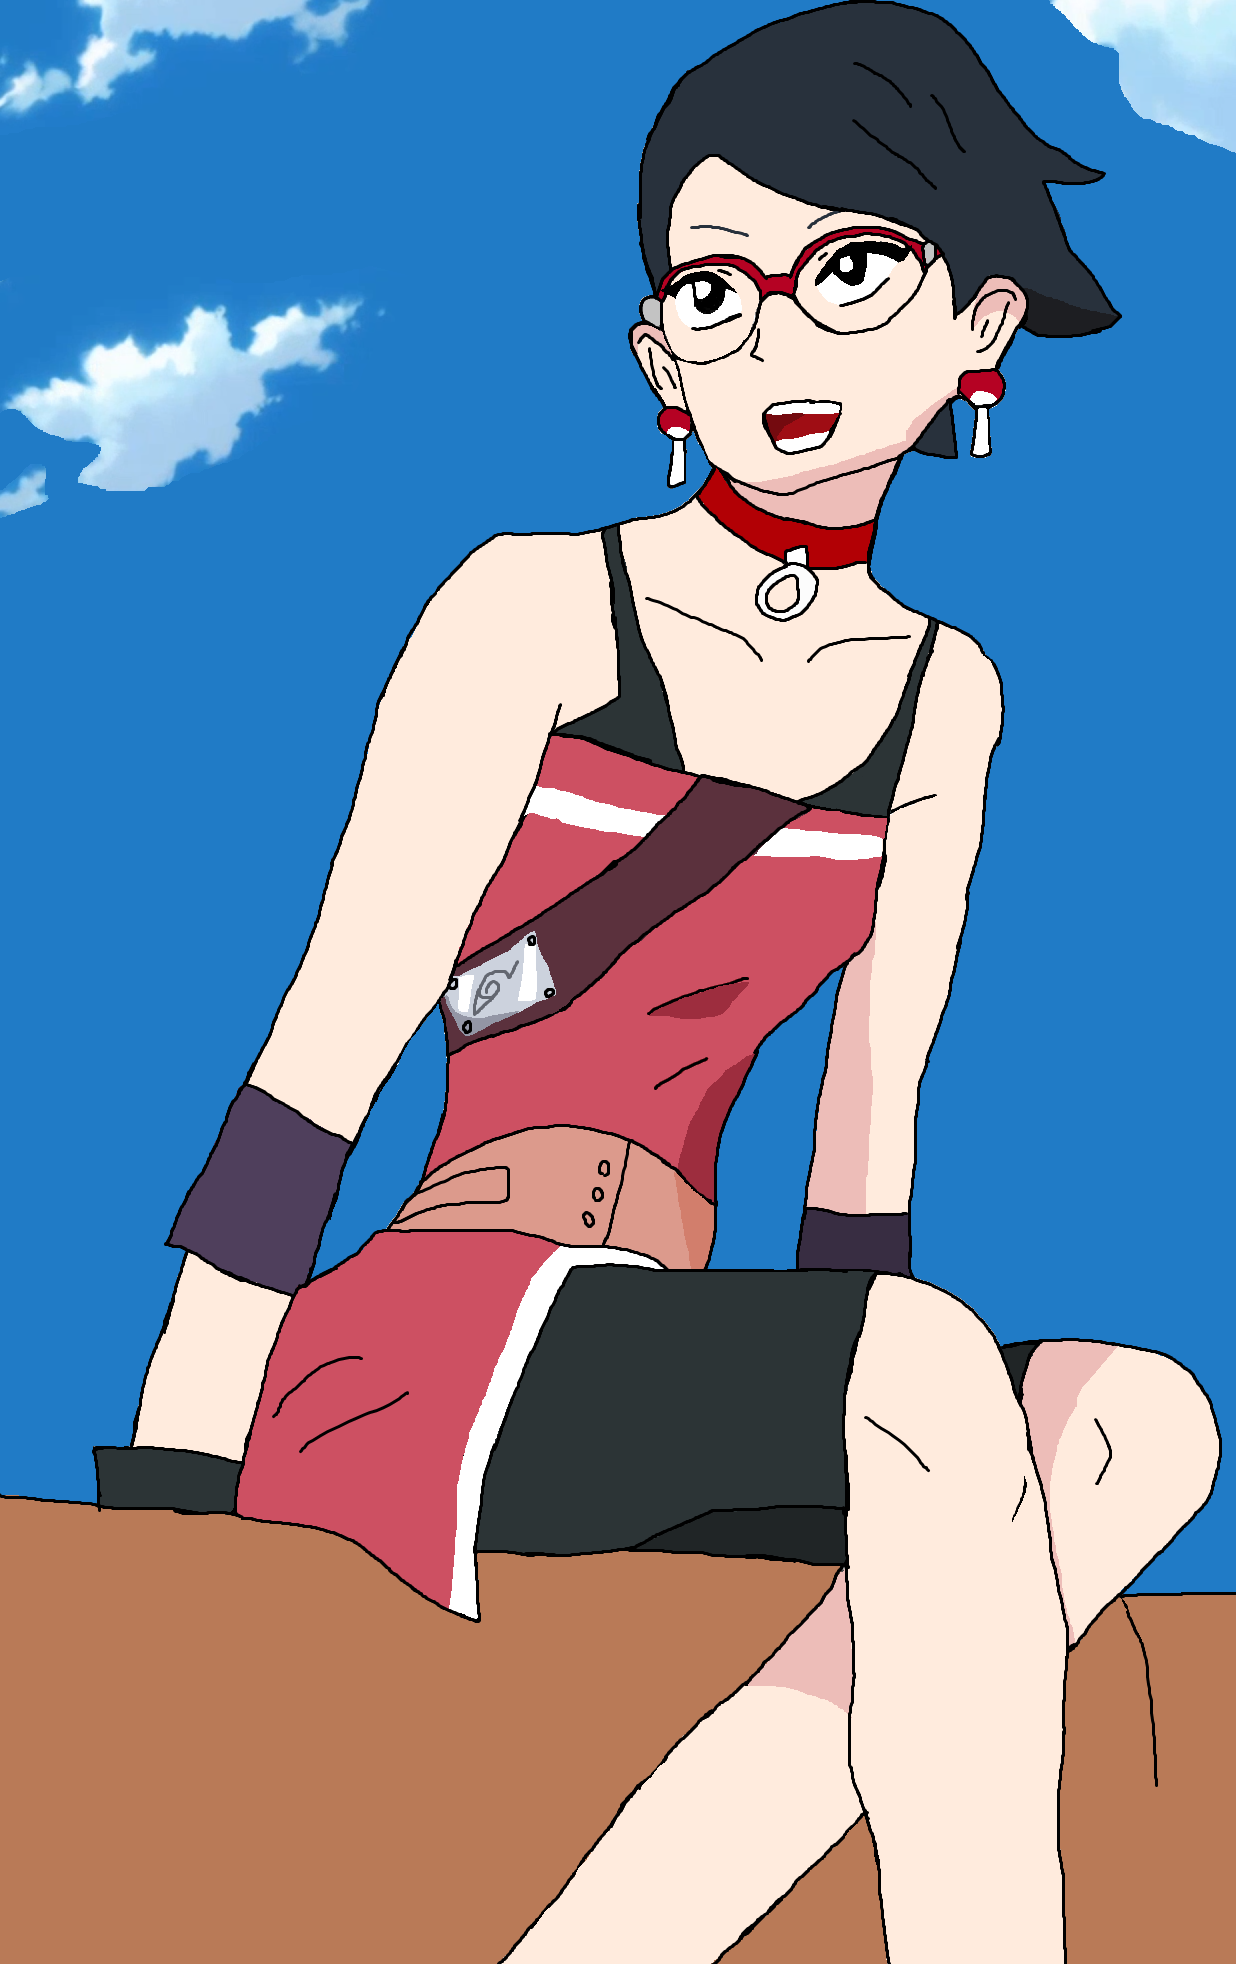 Uchiha Sarada ◇うちは◇ on X: .just a selfie after the mission.   / X